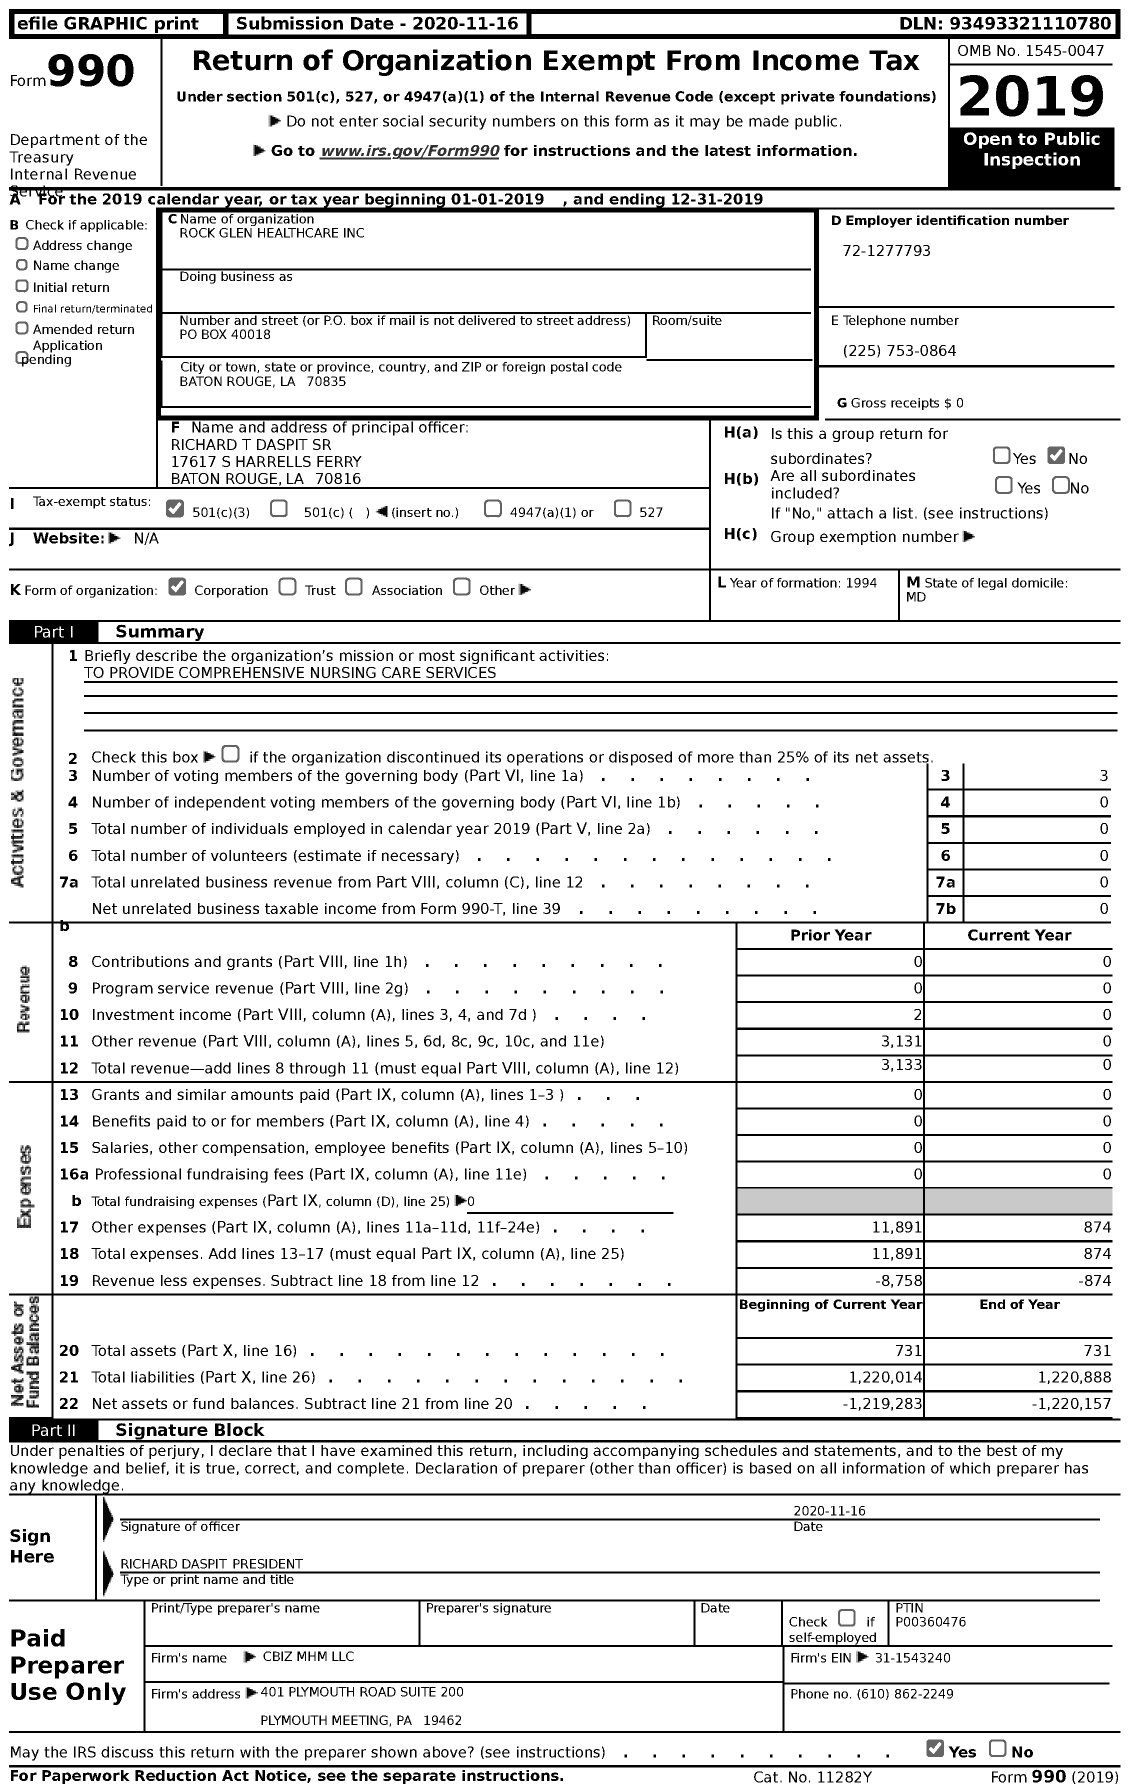 Image of first page of 2019 Form 990 for Foundation Health Services